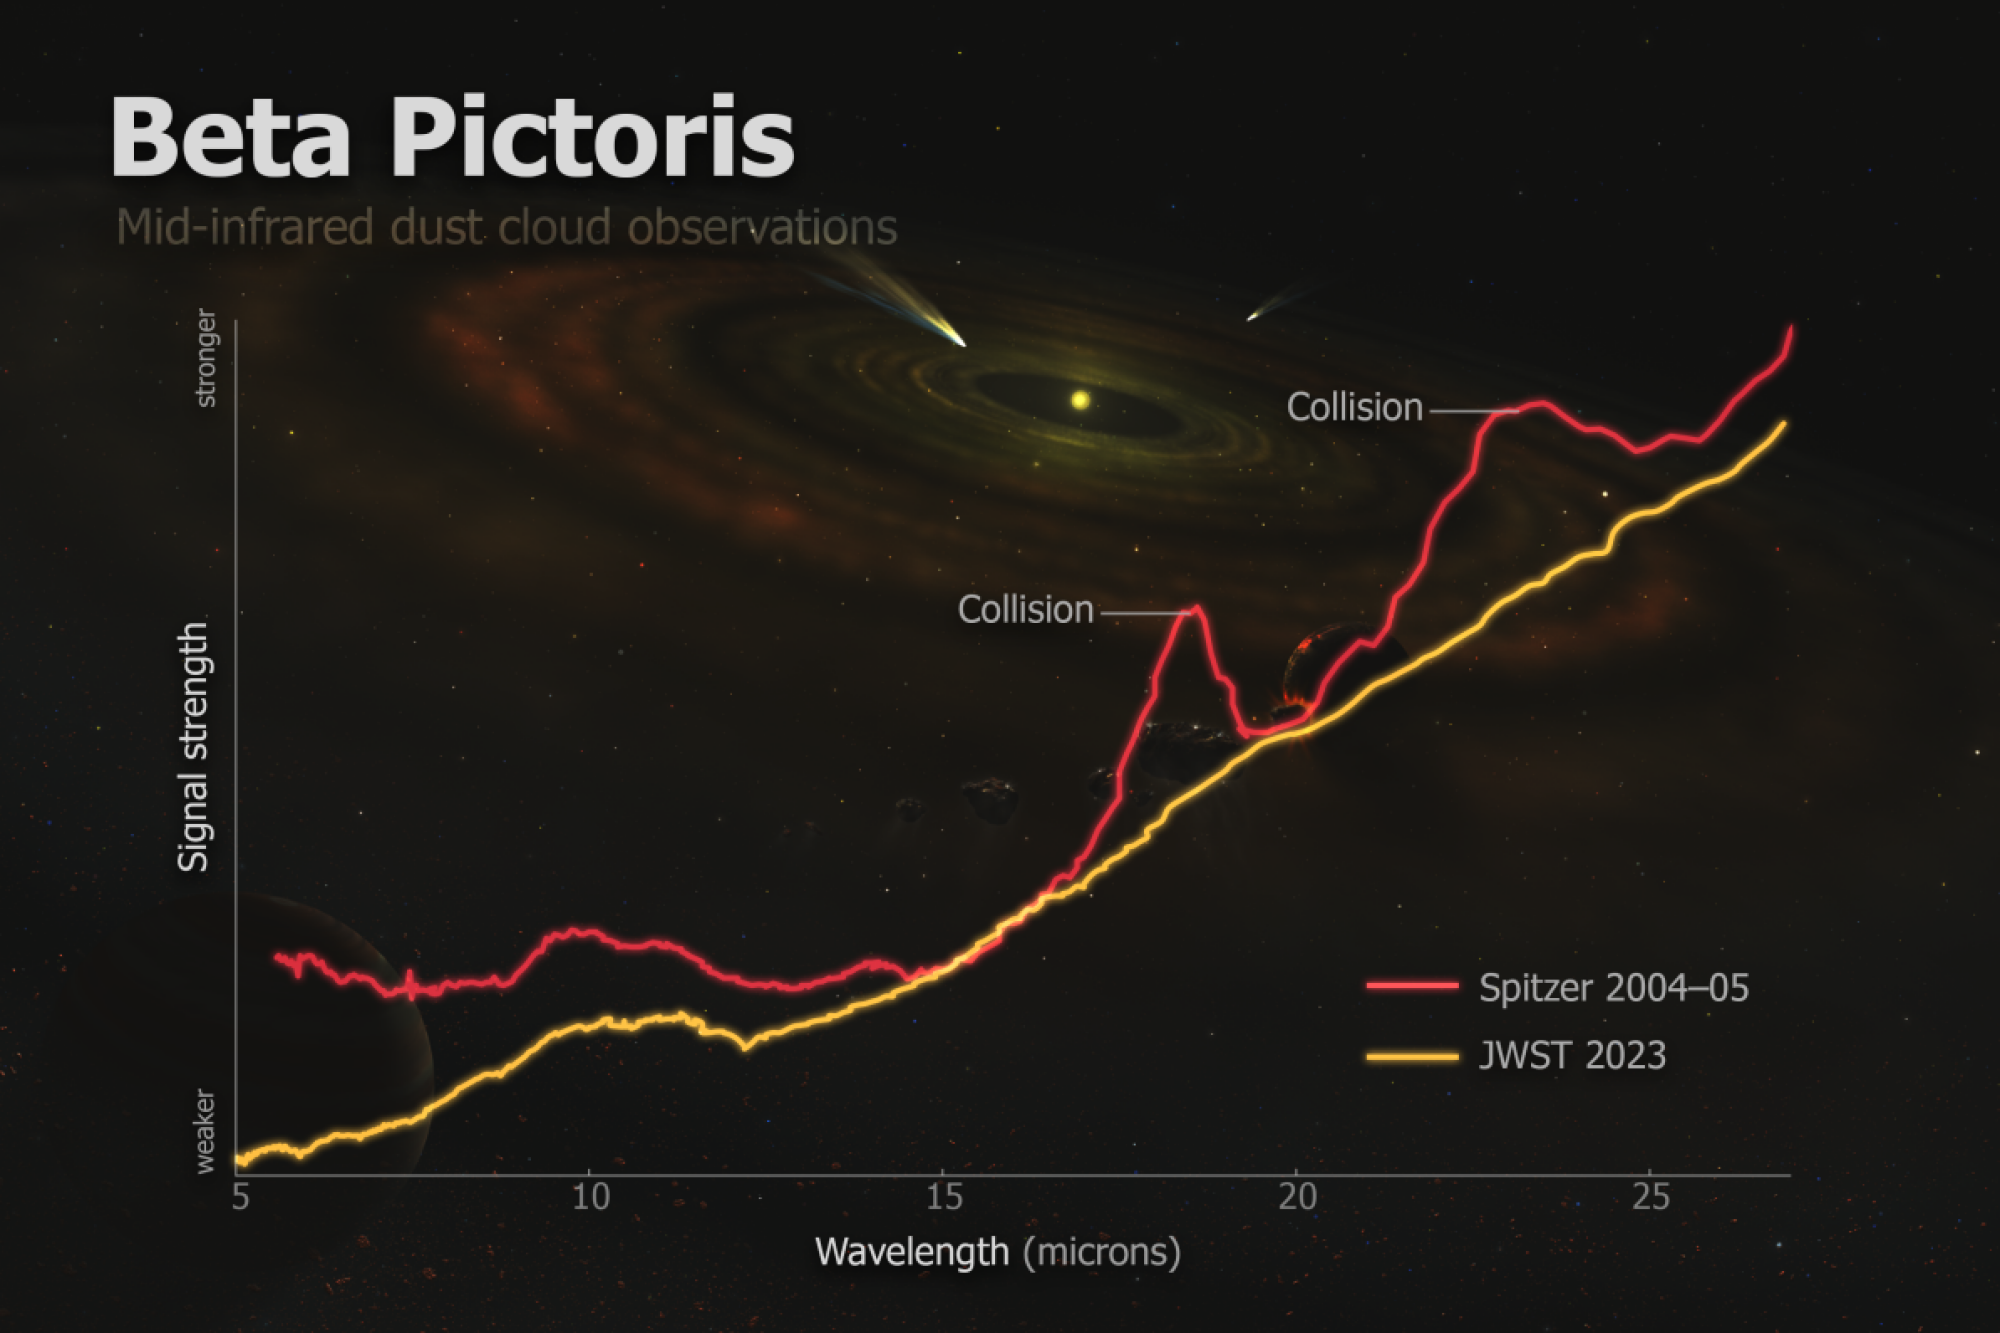 The Spitzer Space Telescope detected clouds of dust in Beta Pictoris twenty years ago. It likely has since dispersed.